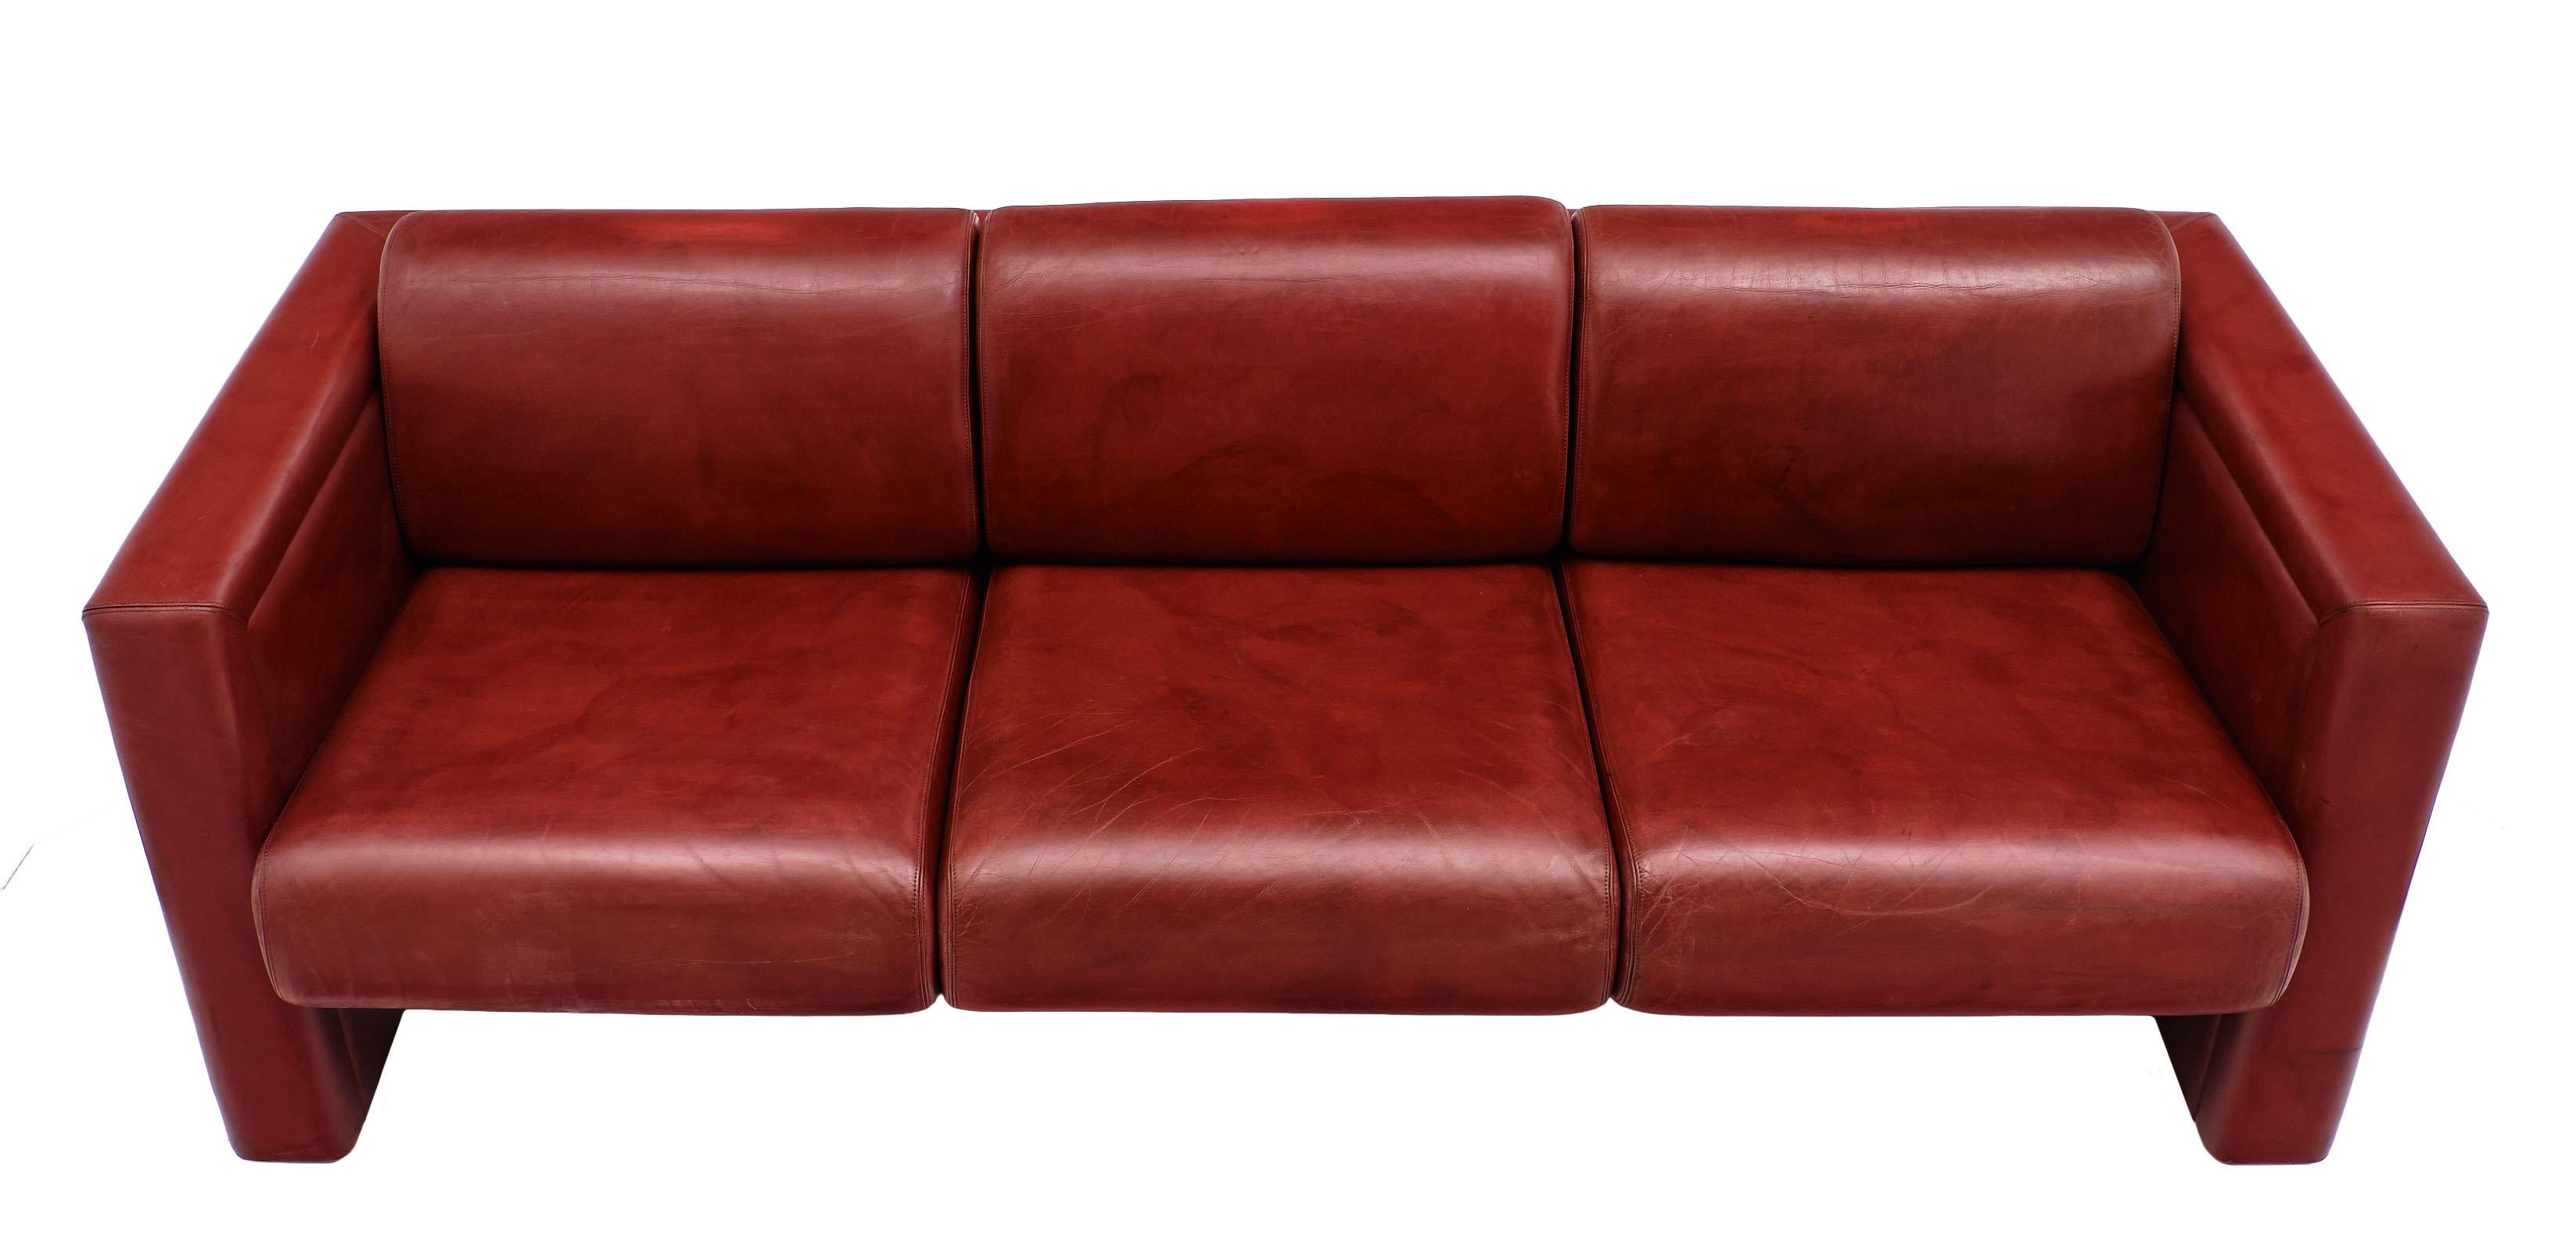 Late 20th Century Red Leather Knoll Sofa